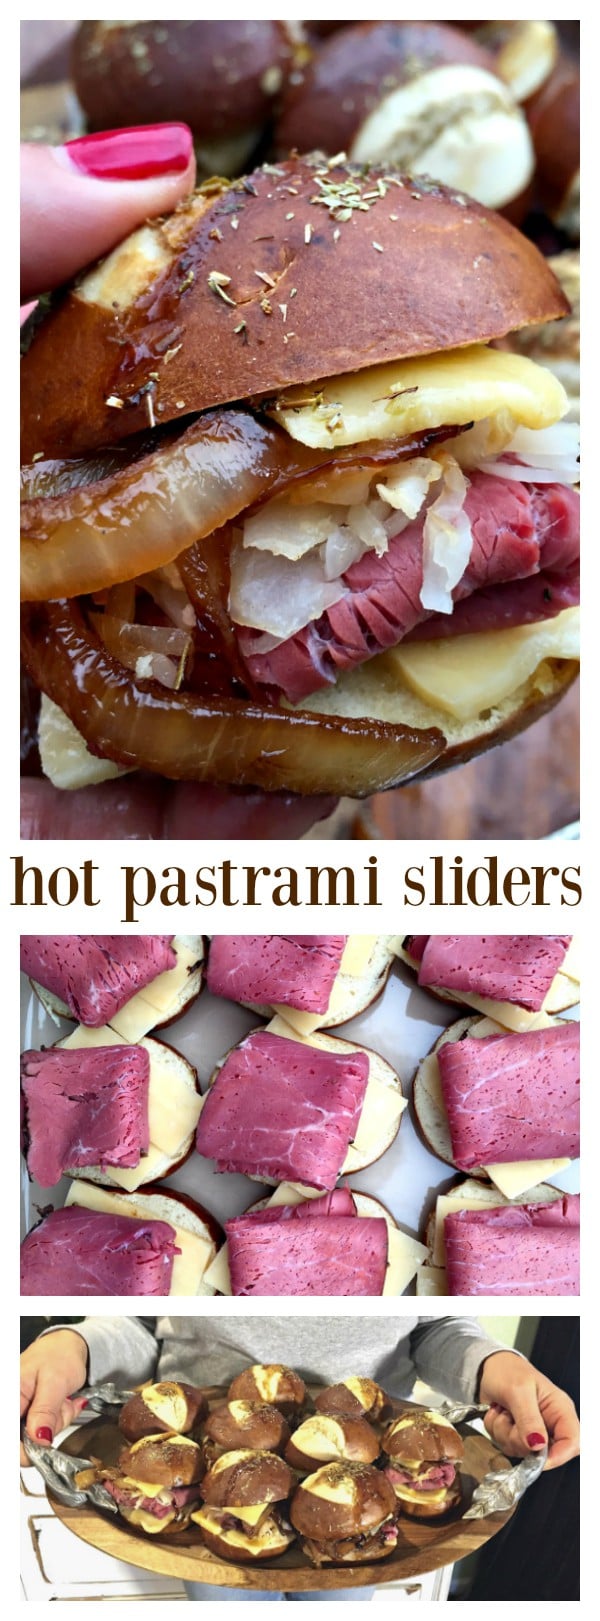 These Hot Pastrami Sliders are the perfect Irish dish to serve for a St. Patrick's Day party!